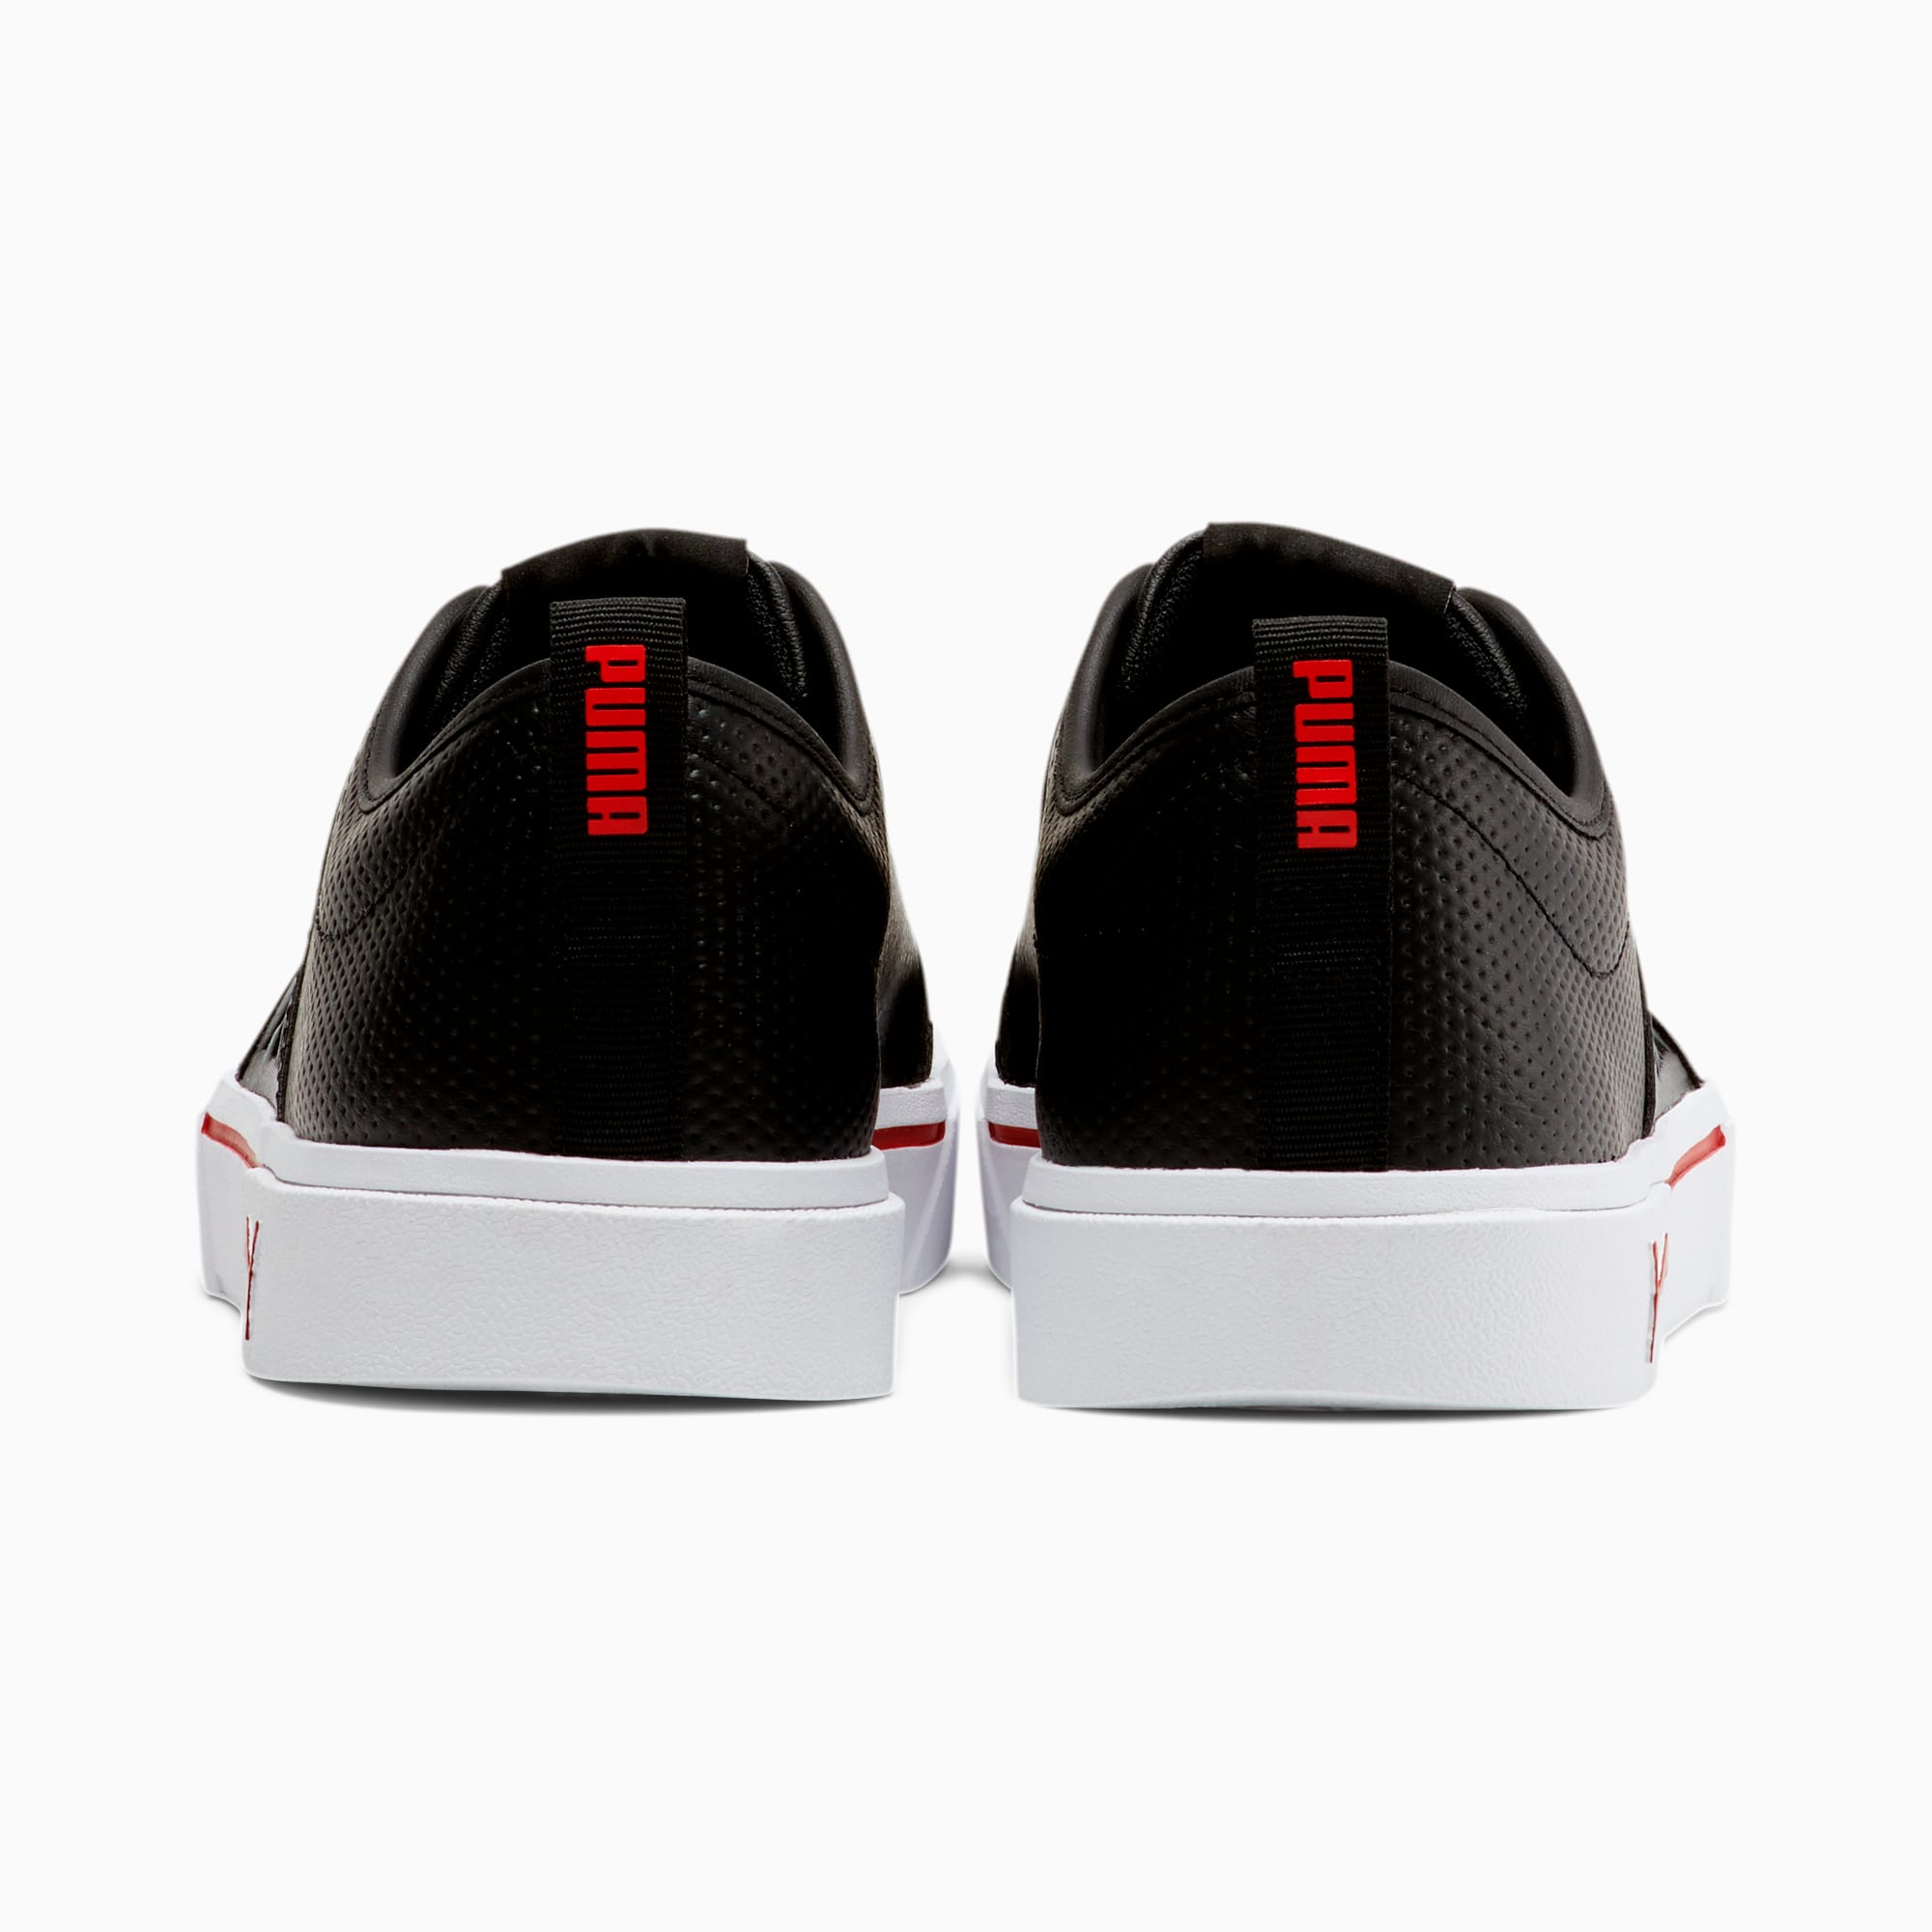 puma el rey perforated leather slip on shoes